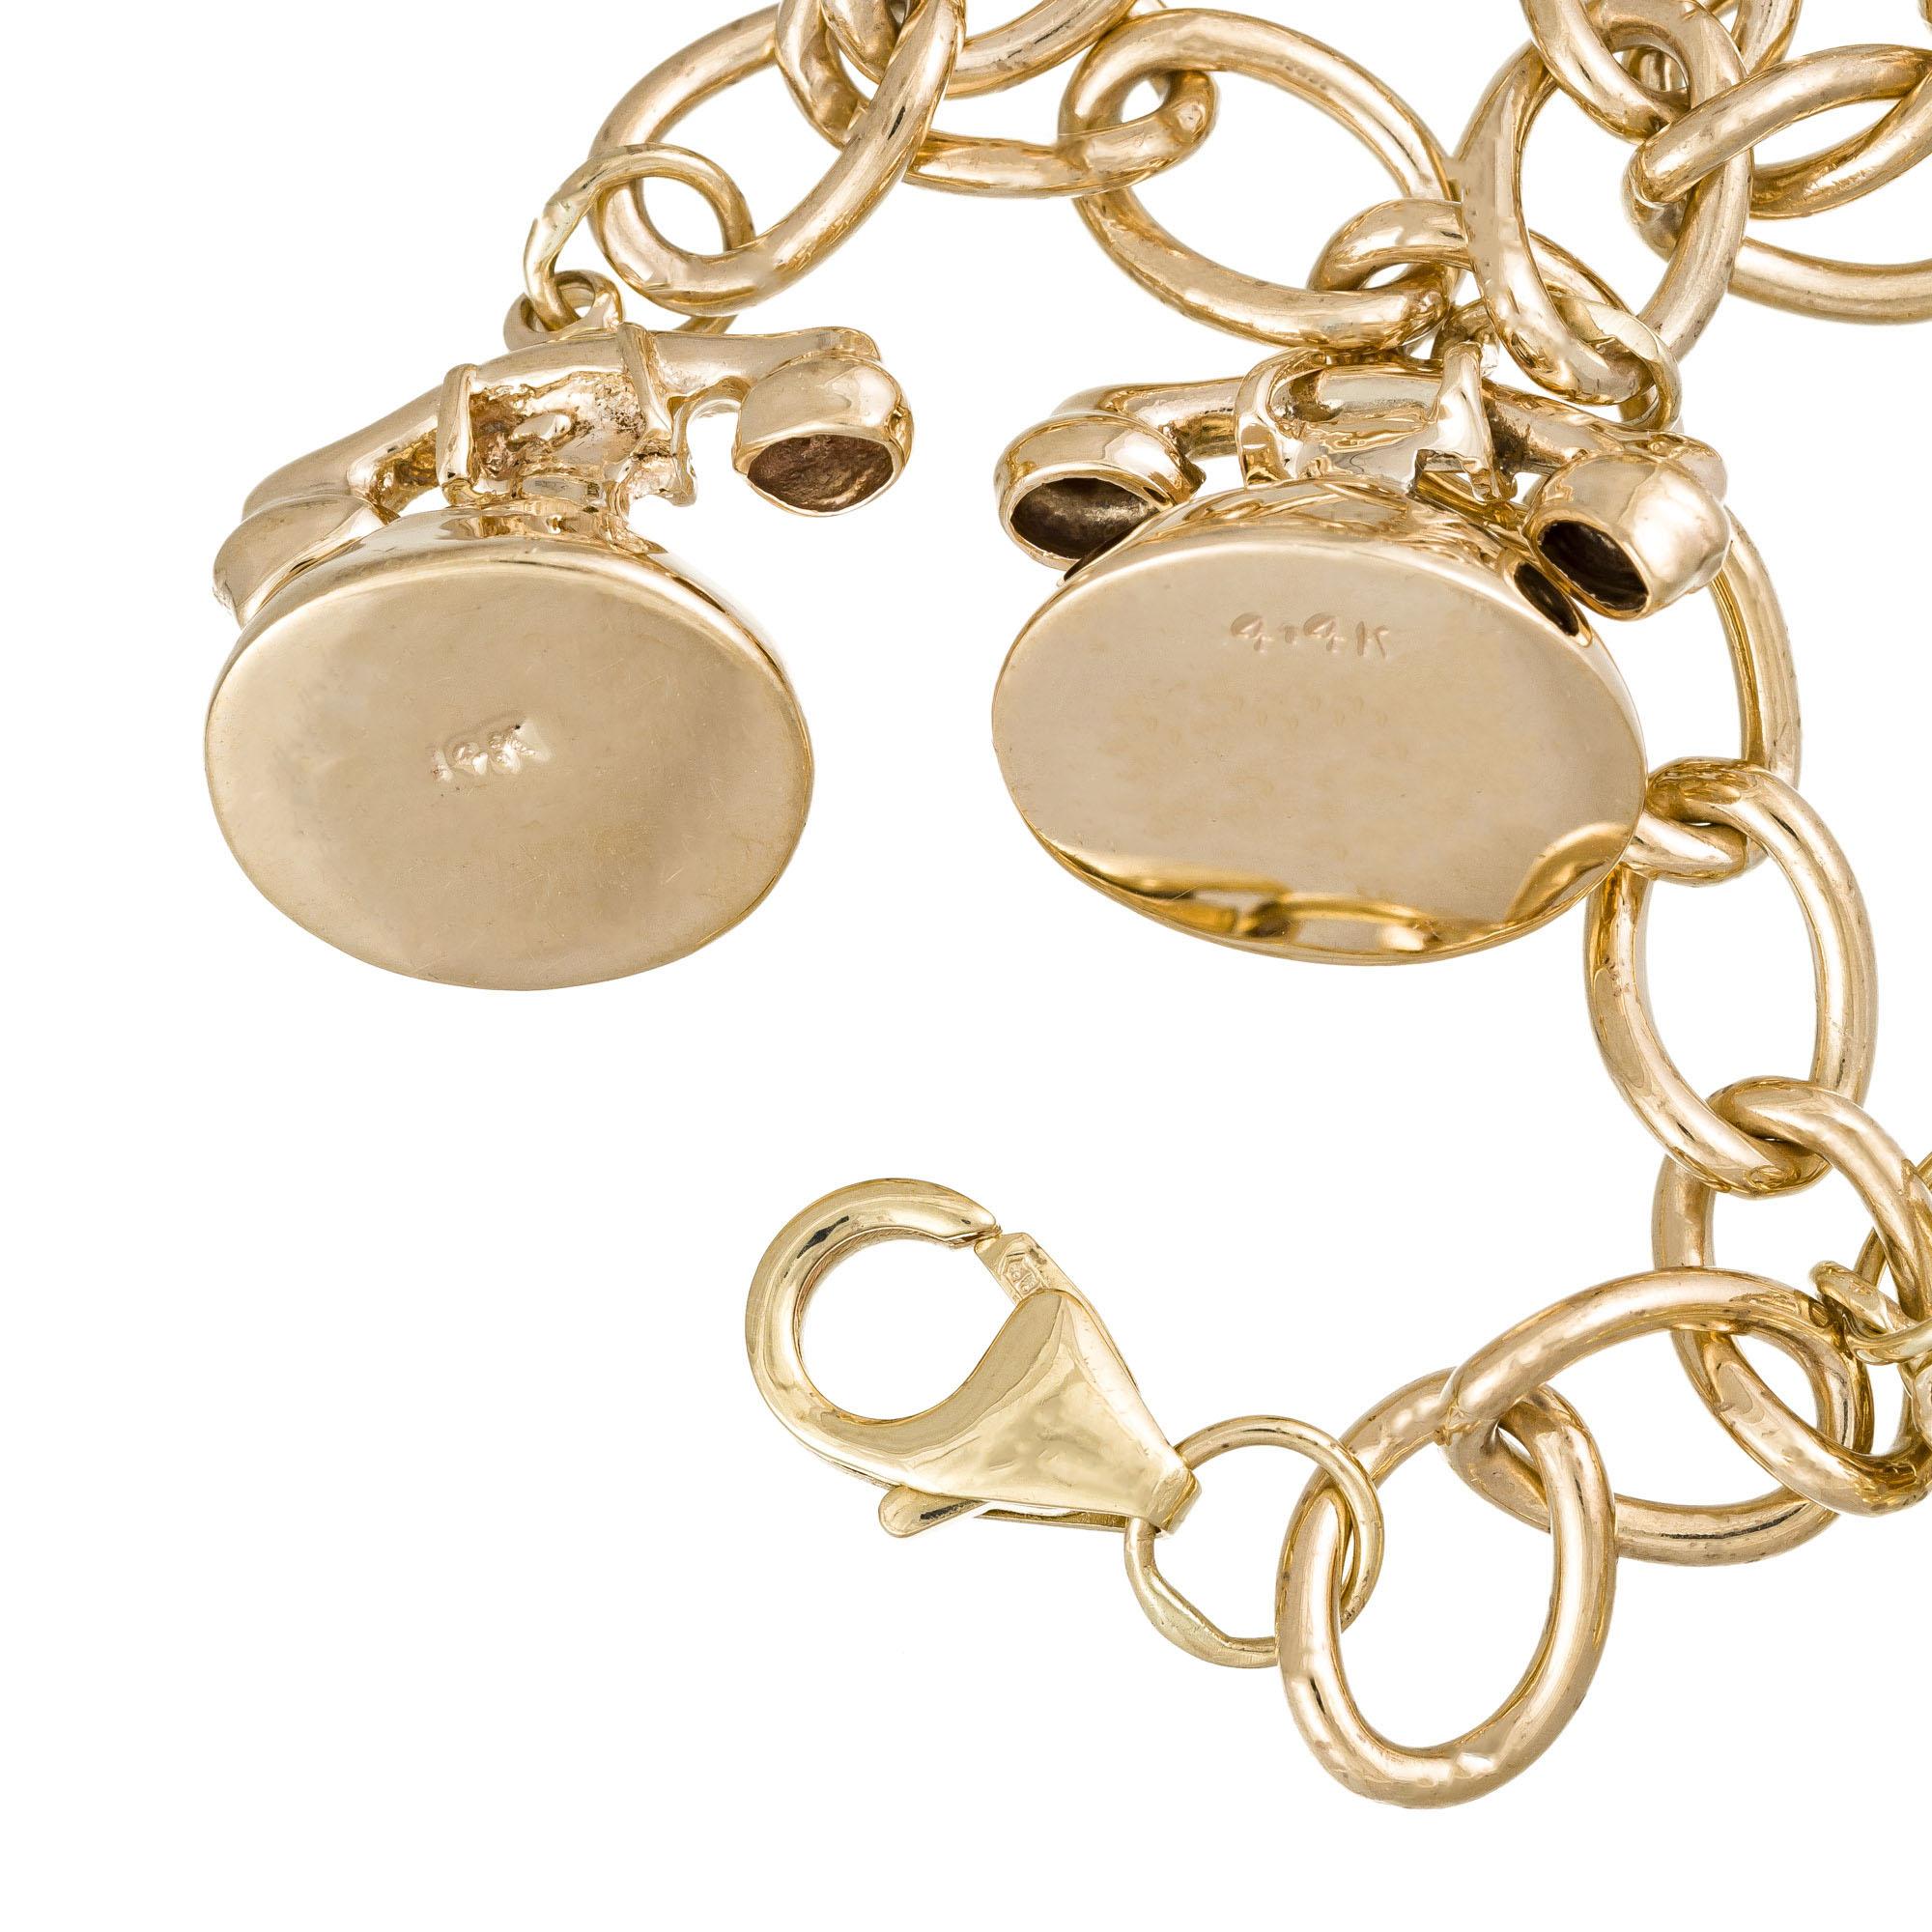 Yellow Gold Telephone Charm Link Bracelet In Good Condition For Sale In Stamford, CT